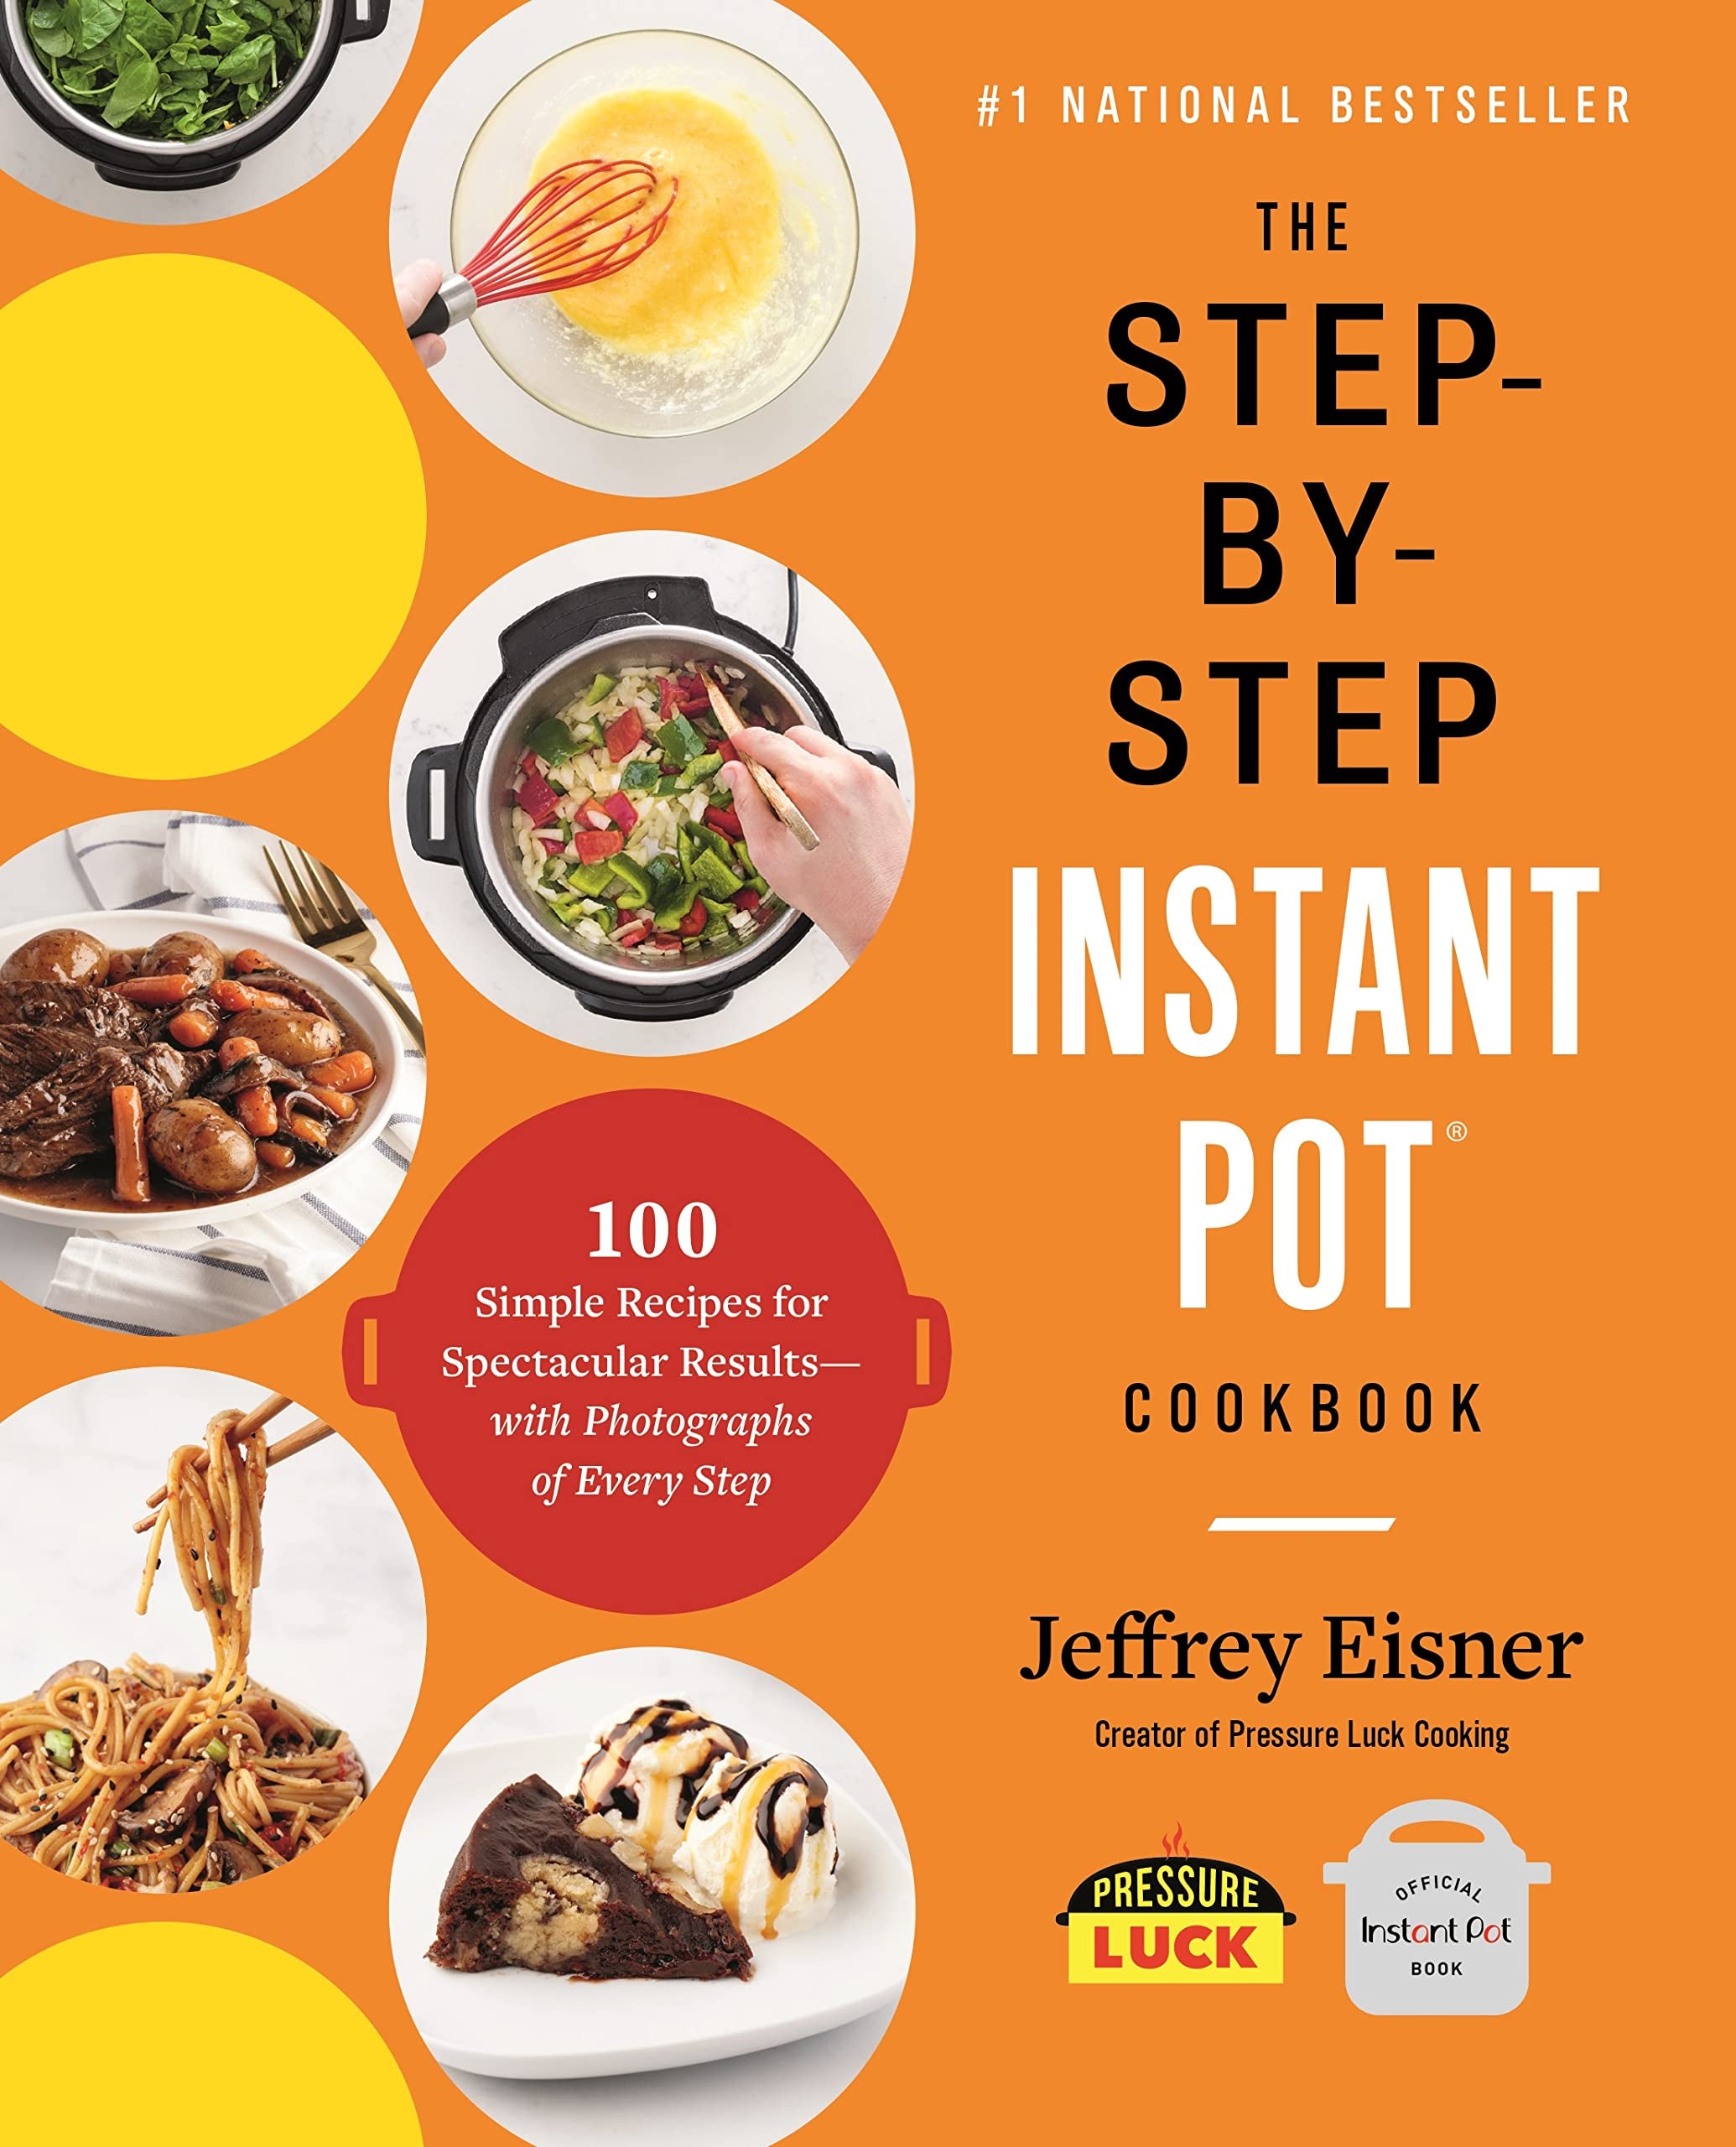 The Step-by-Step Instant Pot Cookbook: 100 Simple Recipes for Spectacular Results -- with Photographs of Every Step (Step-by-Step Instant Pot Cookbooks)